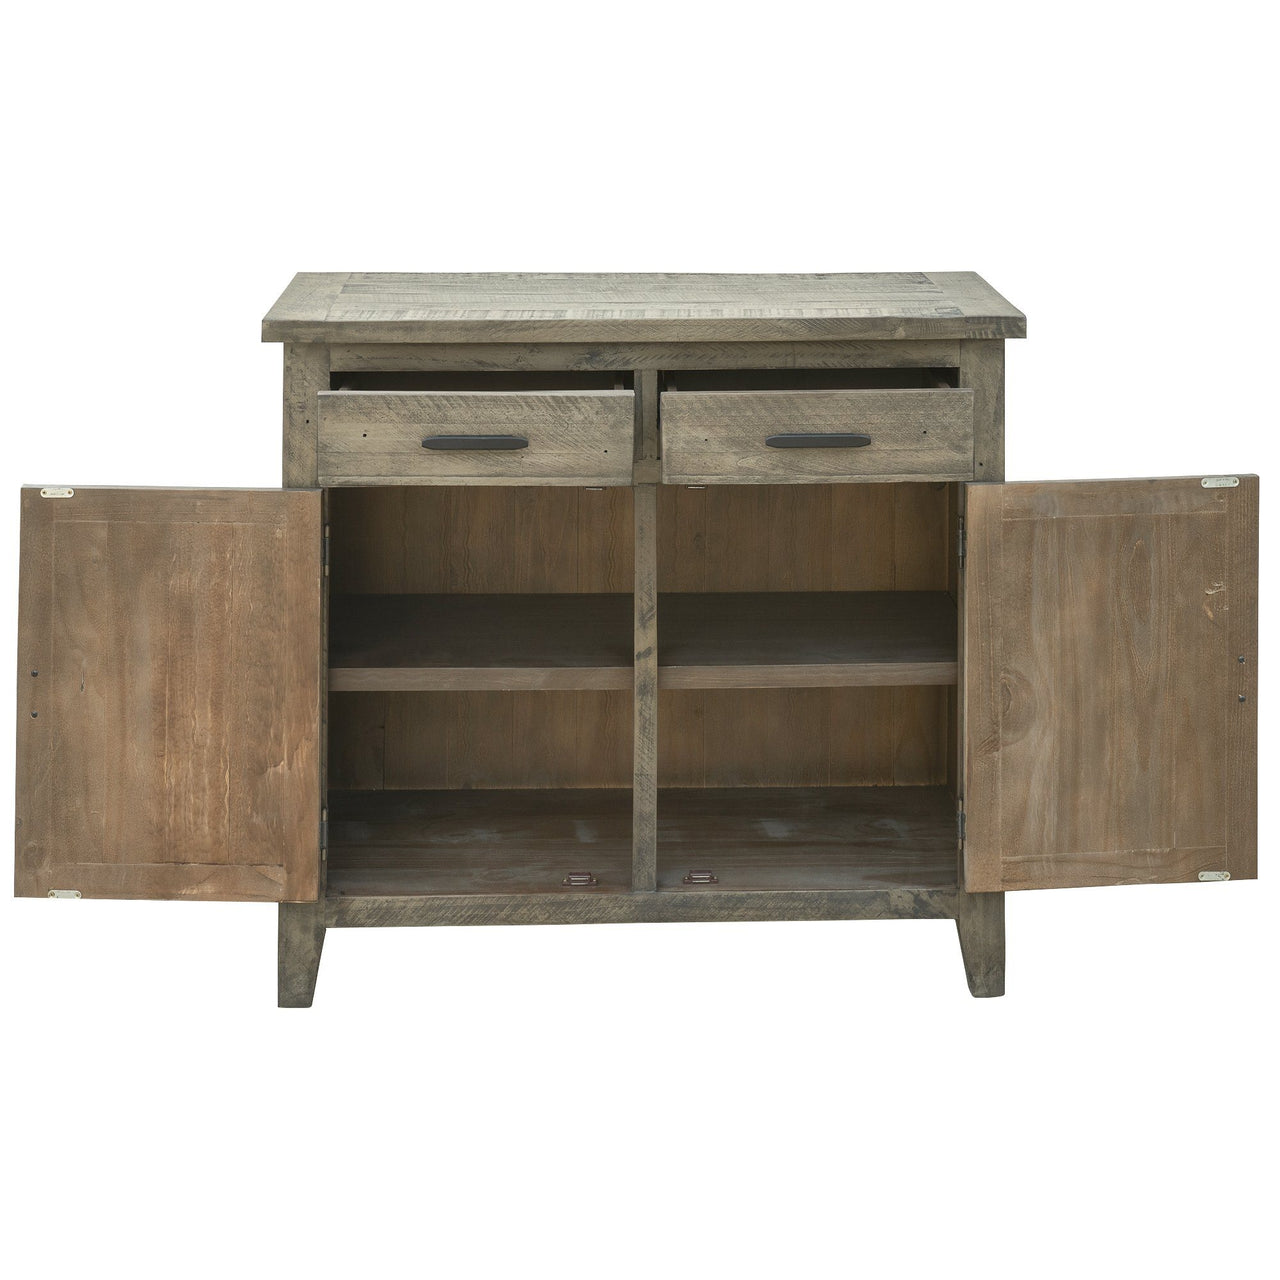 Ashford 2 Pieces Reclaimed Wood Dining Table and Sideboard in Grey Dining Table AndMakers 